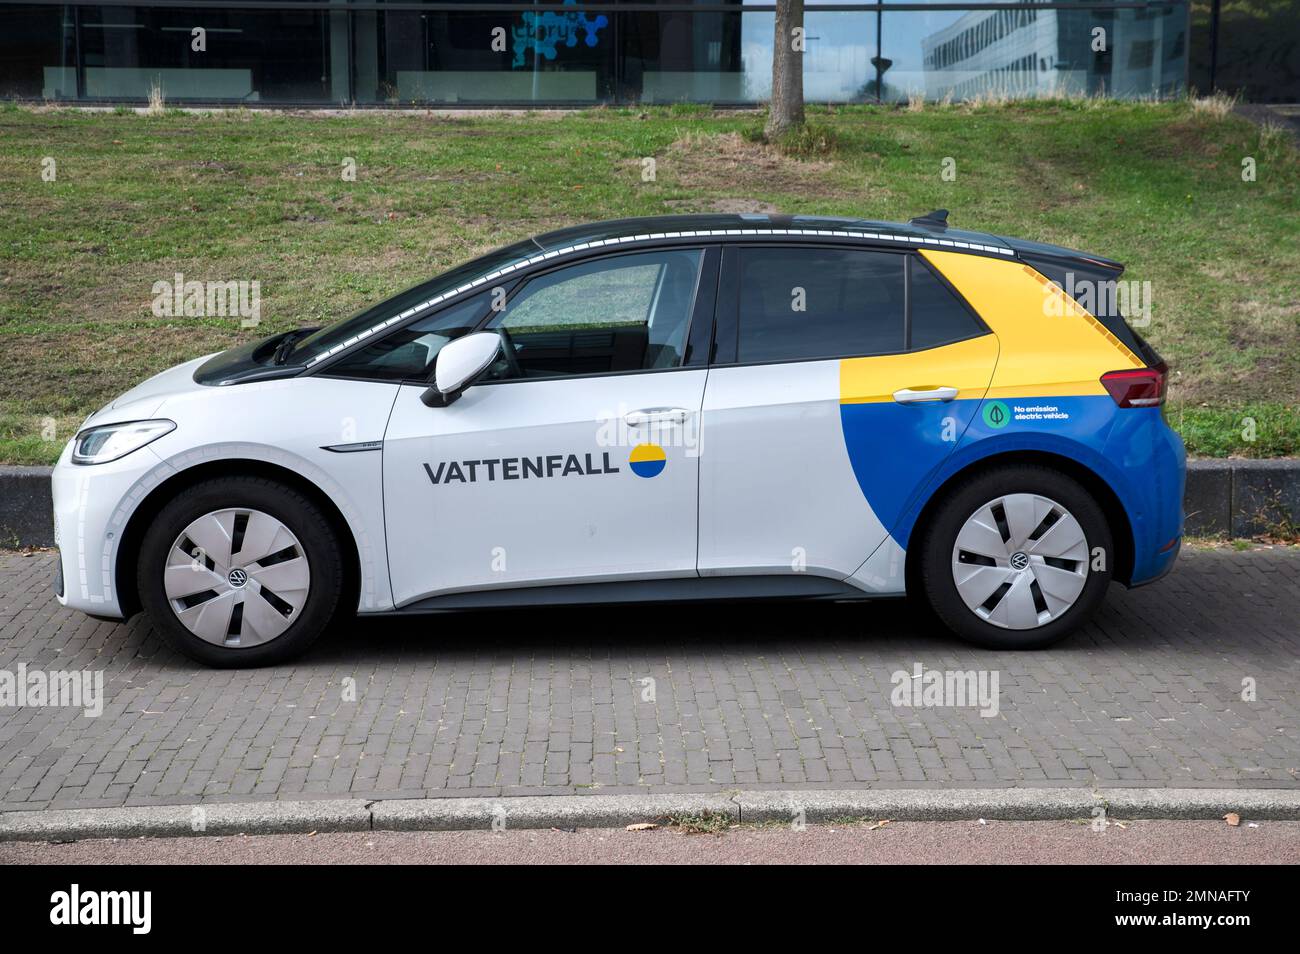 Vattenfall Company Car At Amsterdam The Netherlands 13-9-2022 Stock Photo